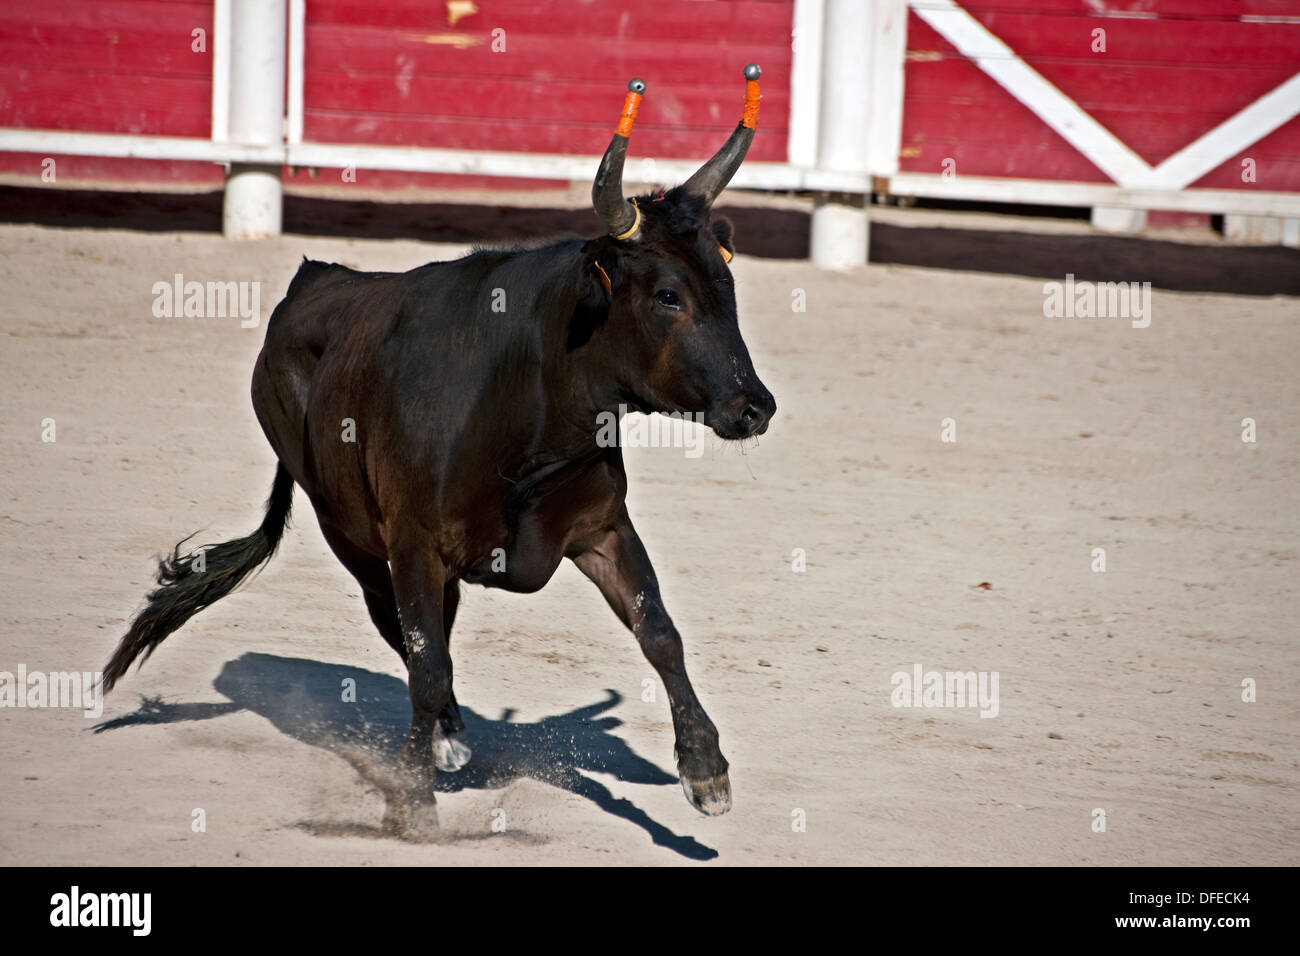 French bull fighting,Course Camarguaise,Bullfighting, Fontvieille France, Bull at full charge,David Collingwood Photographer Stock Photo